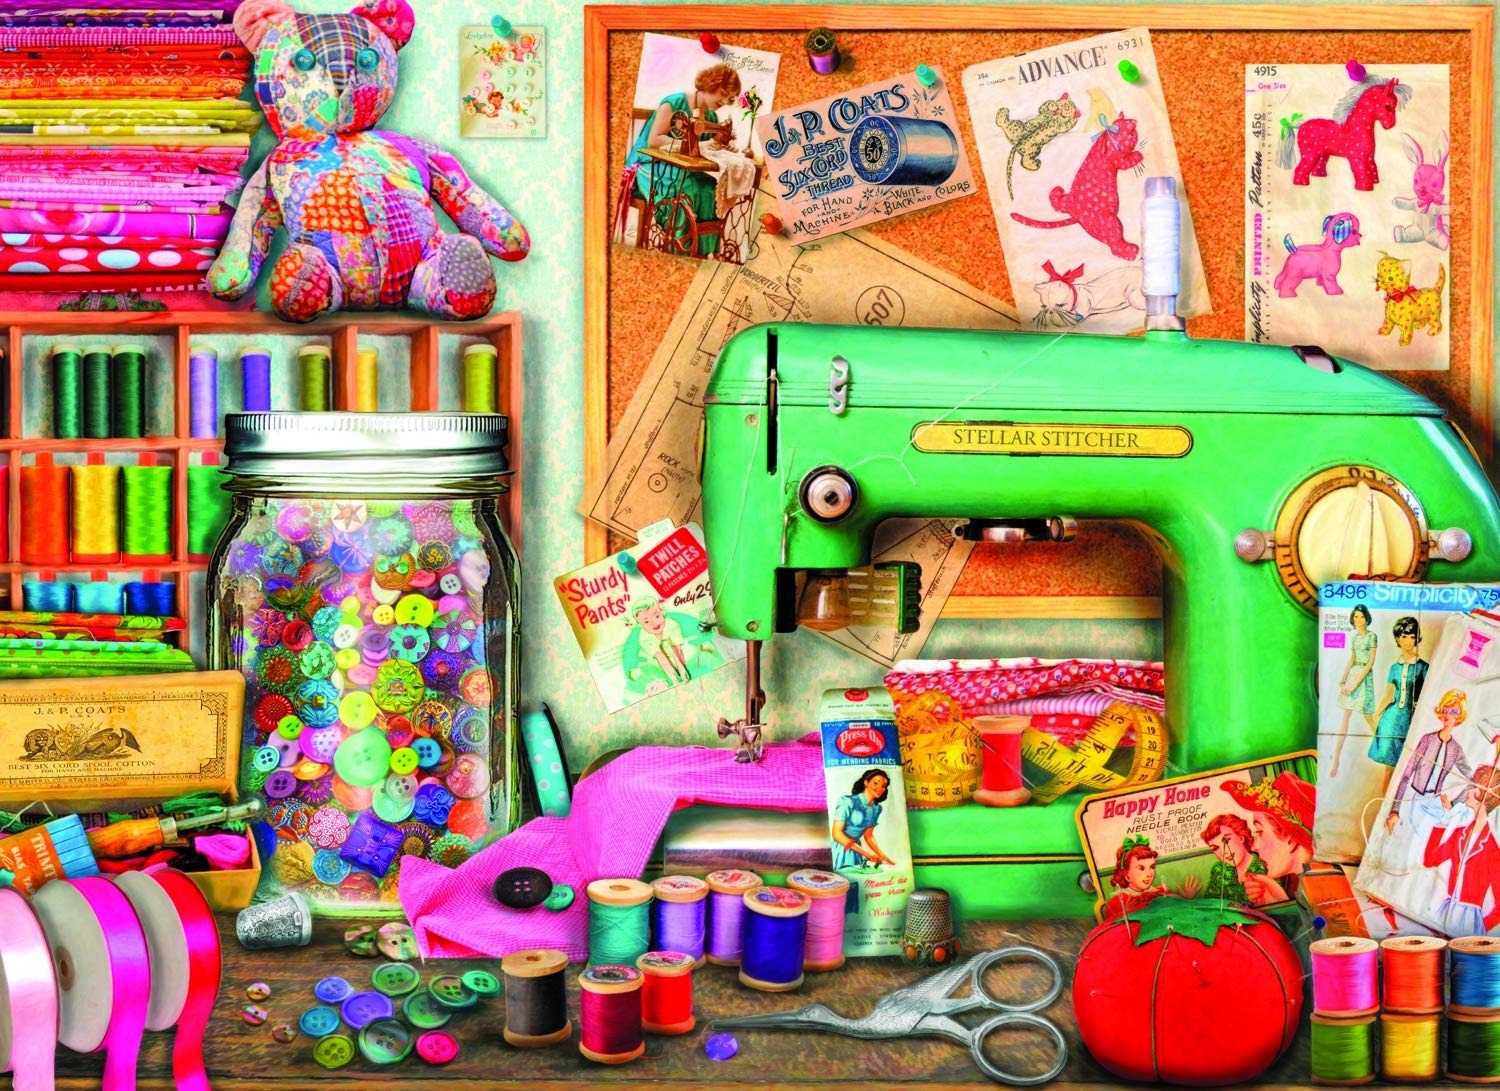 The Sewing Desk - Crafts Yarn Bear Patches Art Home 500 pc Jigsaw by Artist Aimee Stewart